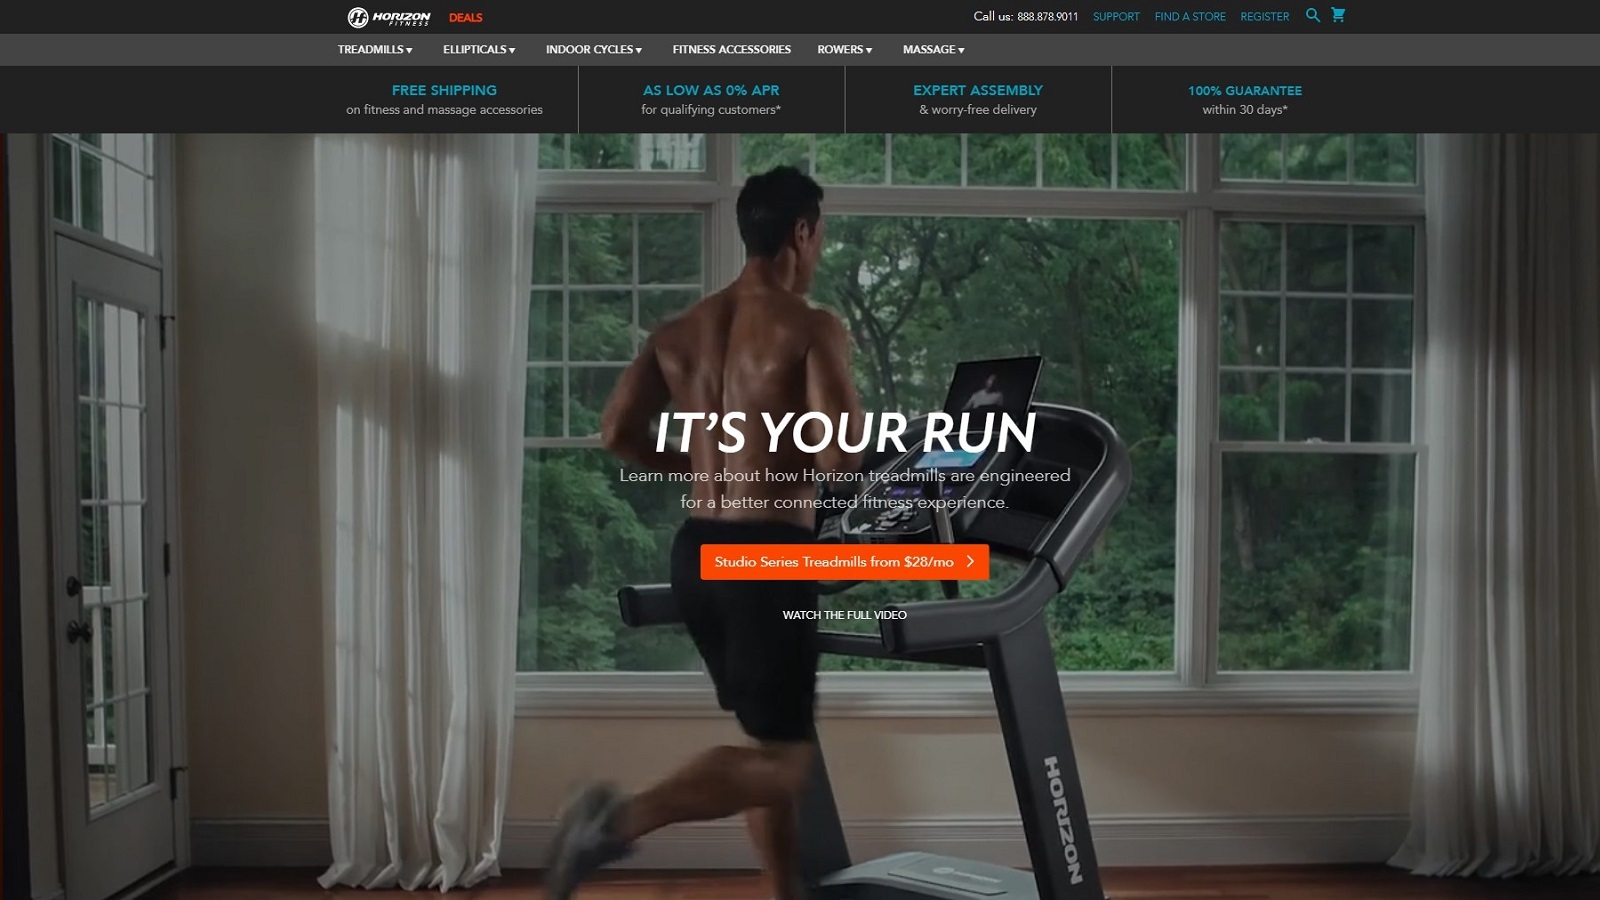 Horizon Treadmill Review: What Should You Watch Before You Buy?